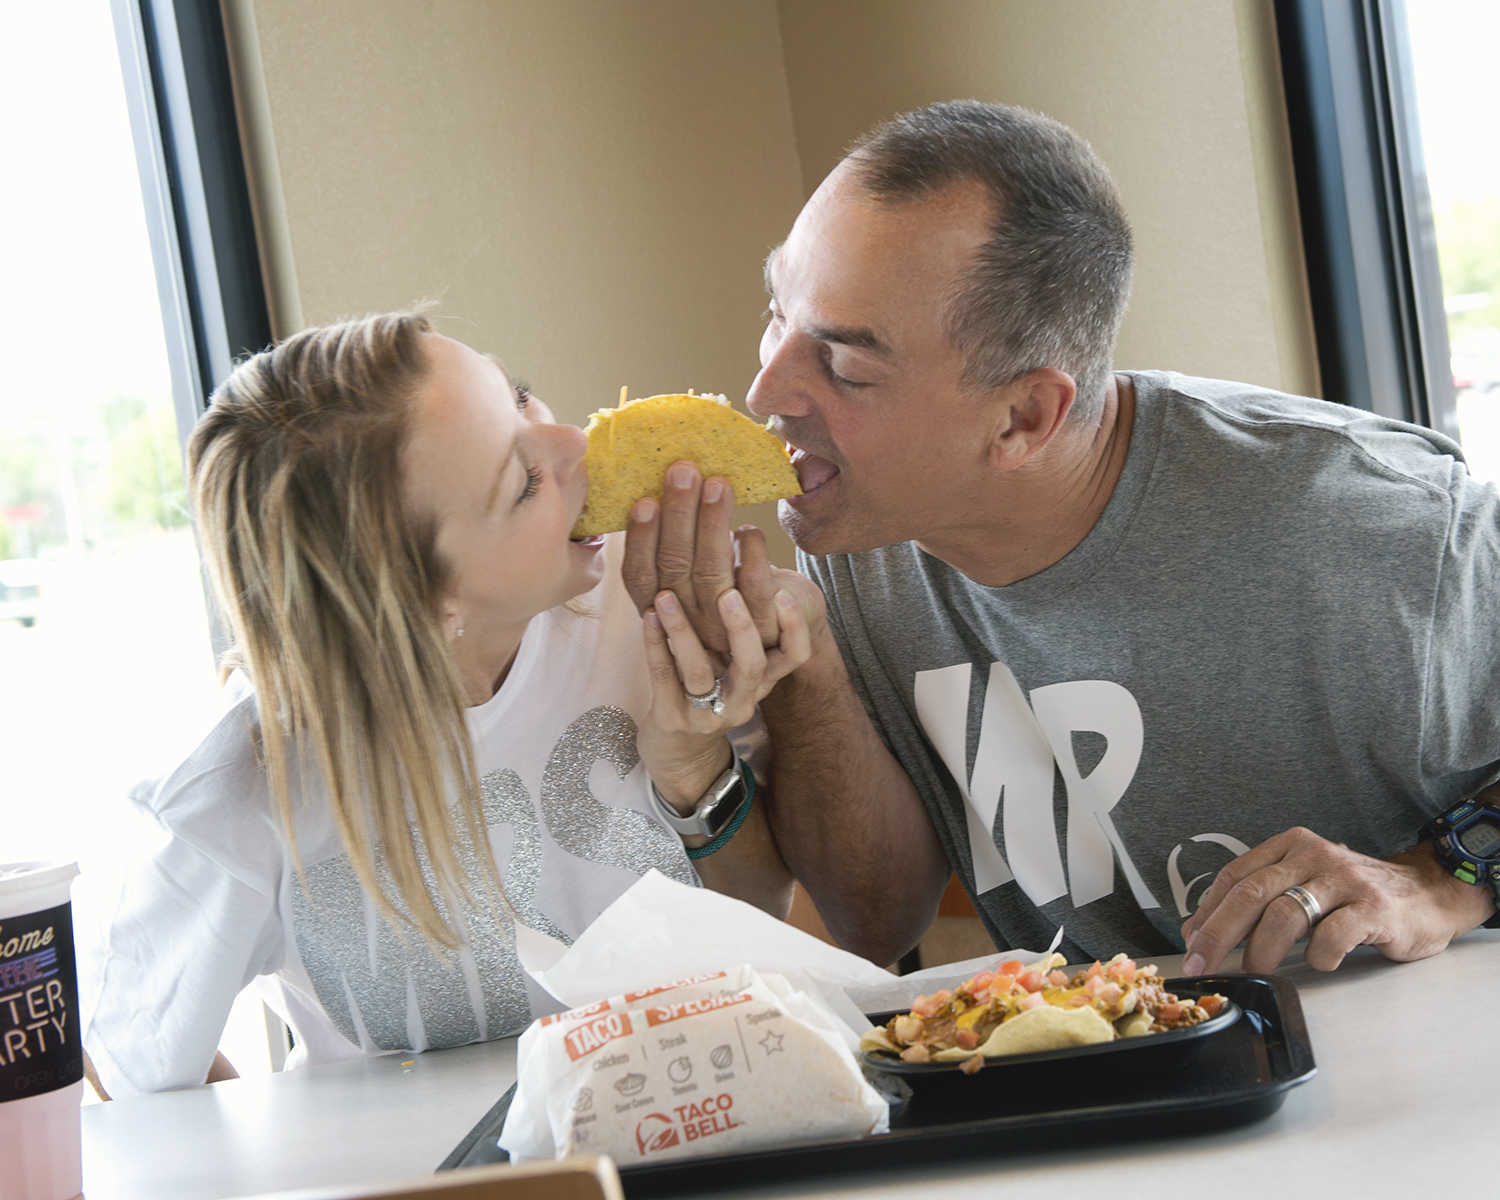 husband and wife take bite of opposite end of taco with a tray off food in front of them at taco bell